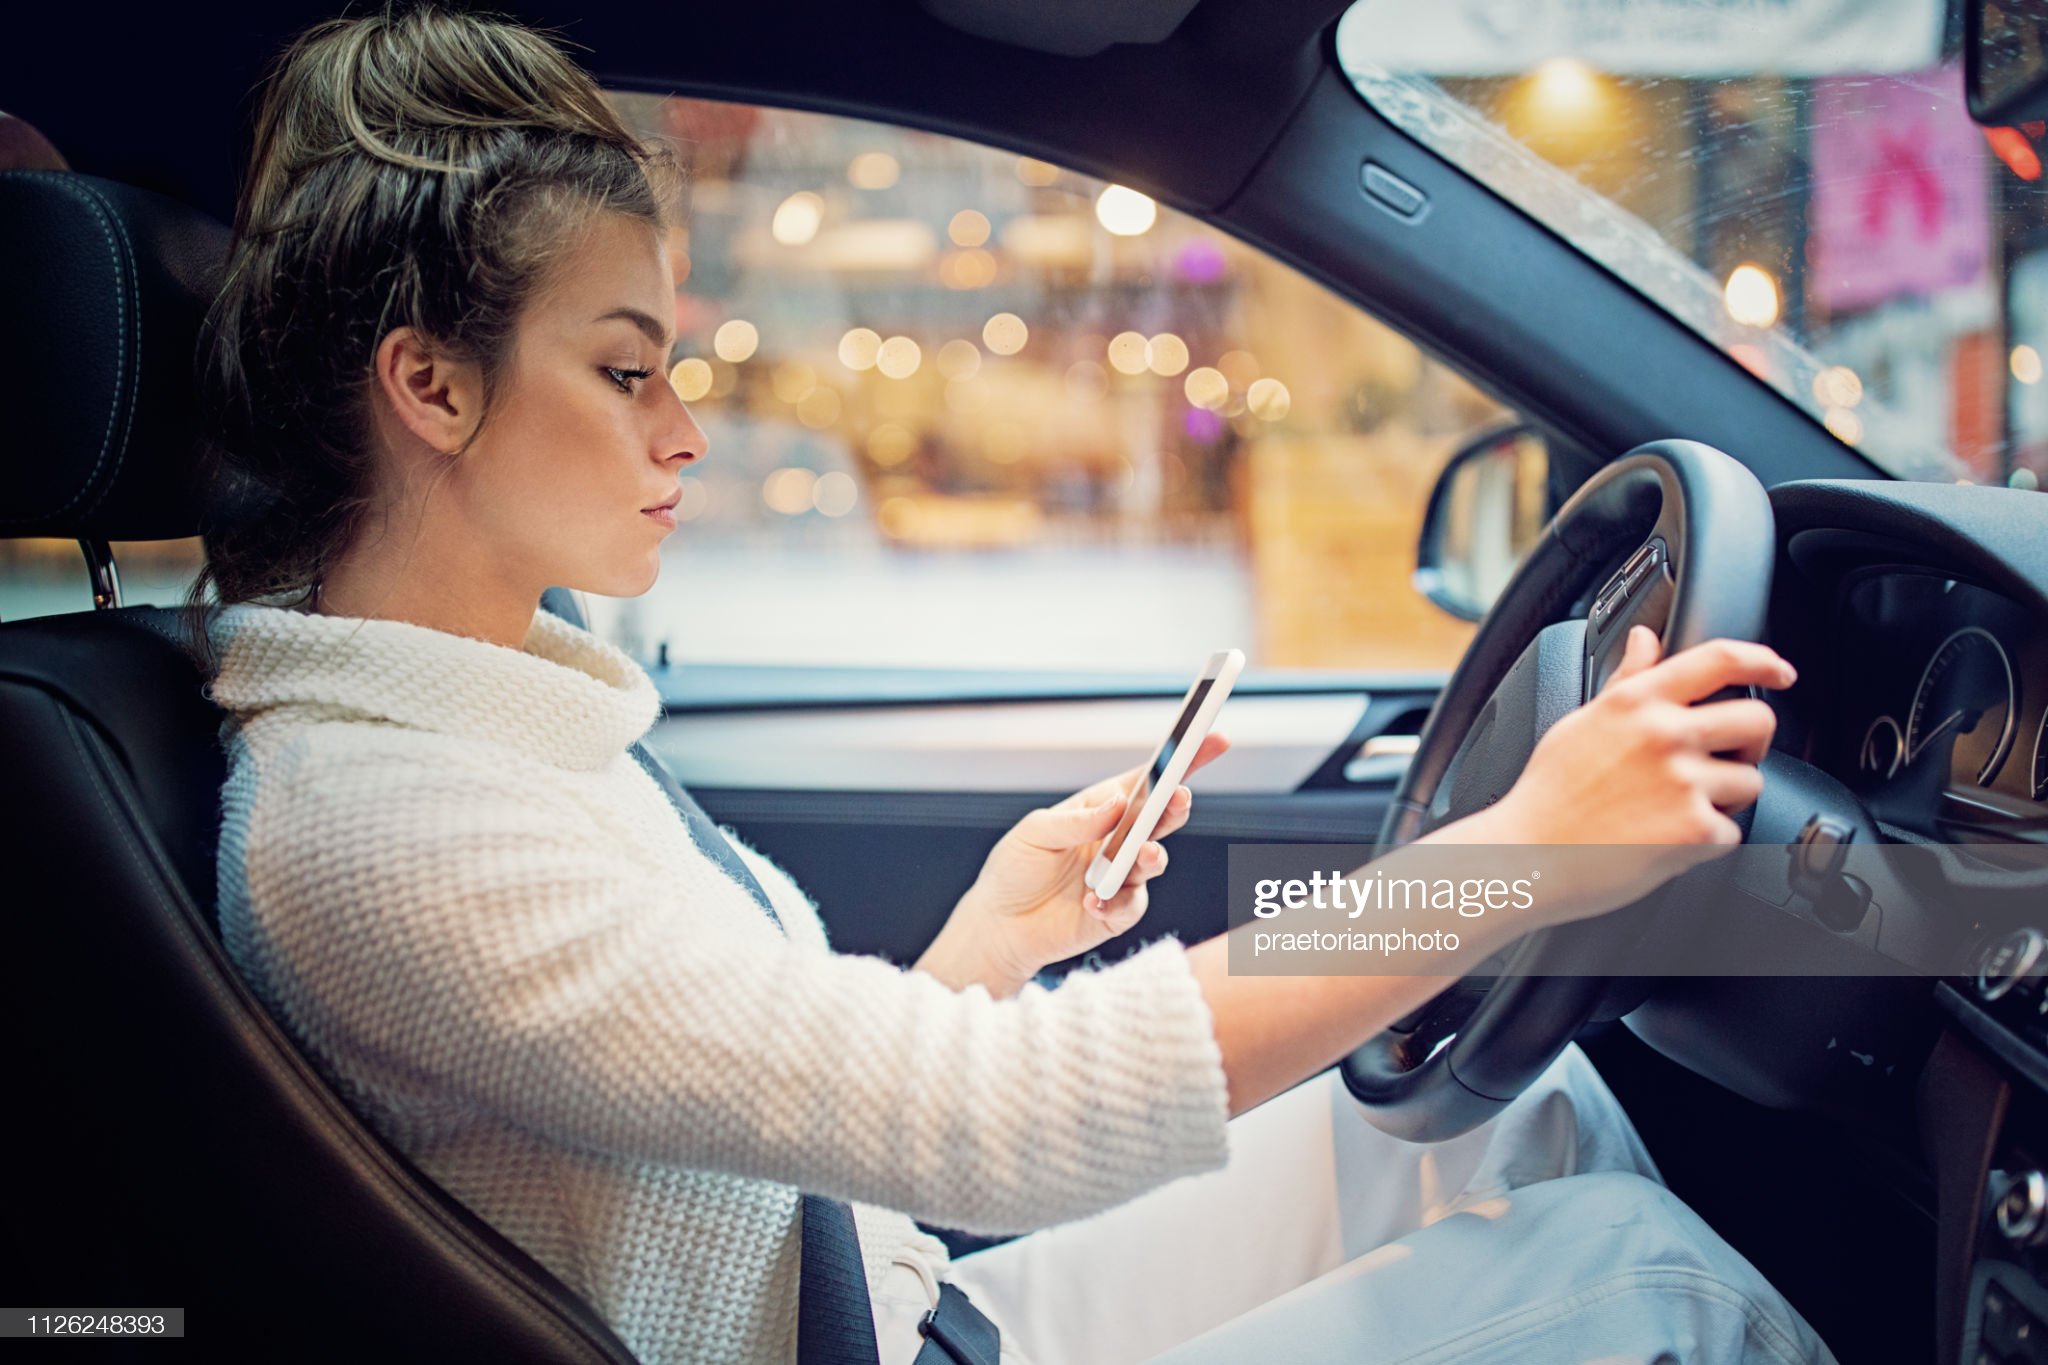 DISTRACTED DRIVING IS A BIG PROBLEM